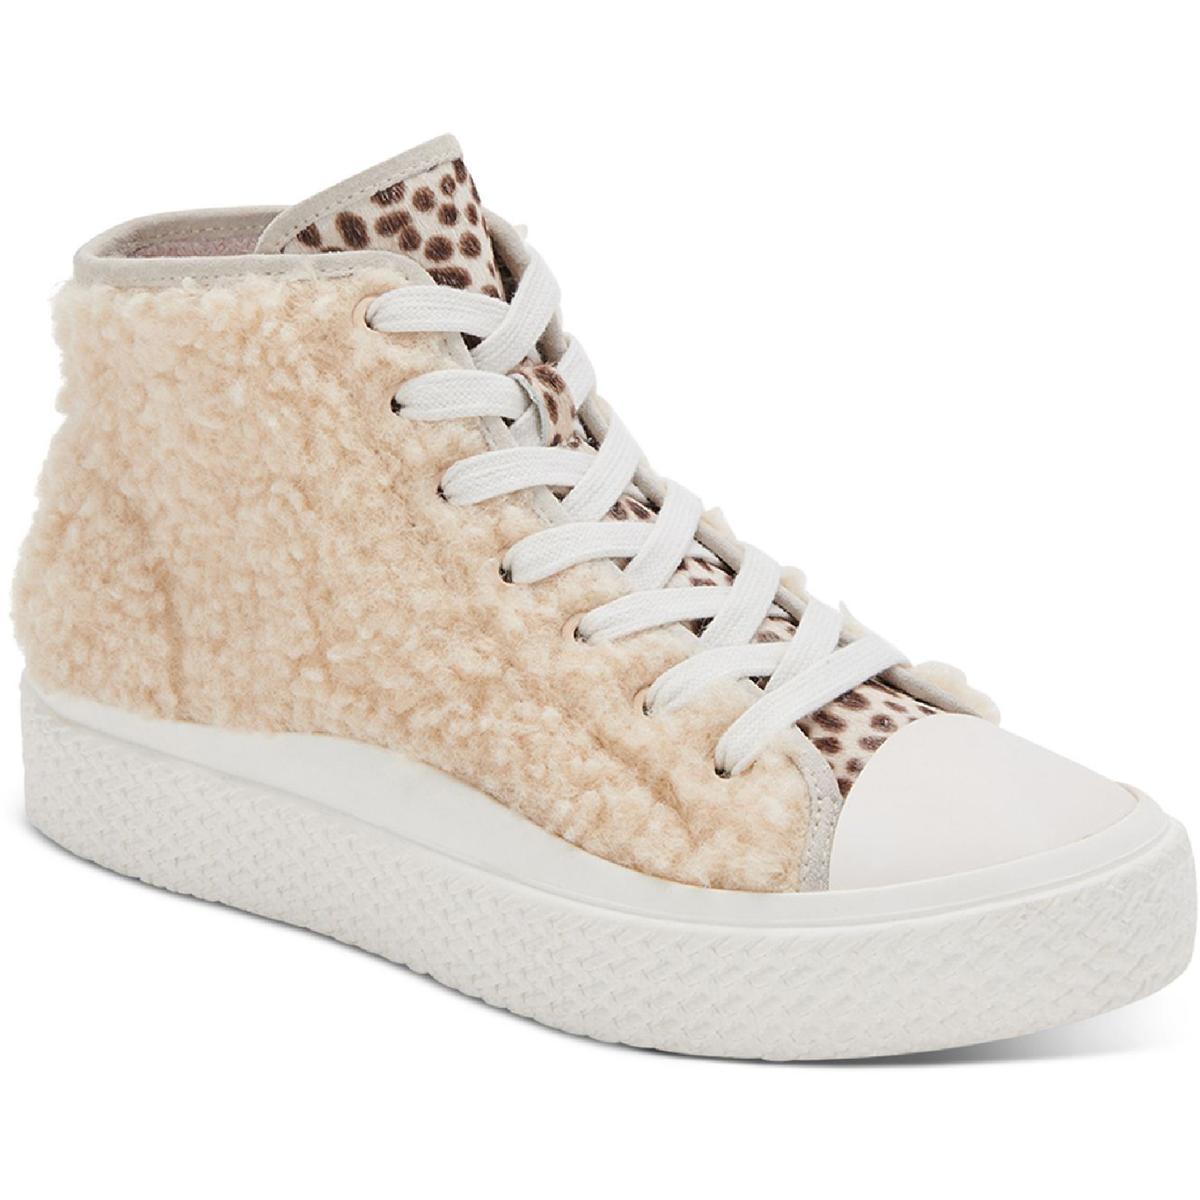 Dolce Vita Womens Veola Plush Casual and Fashion Sneakers Shoes BHFO ...